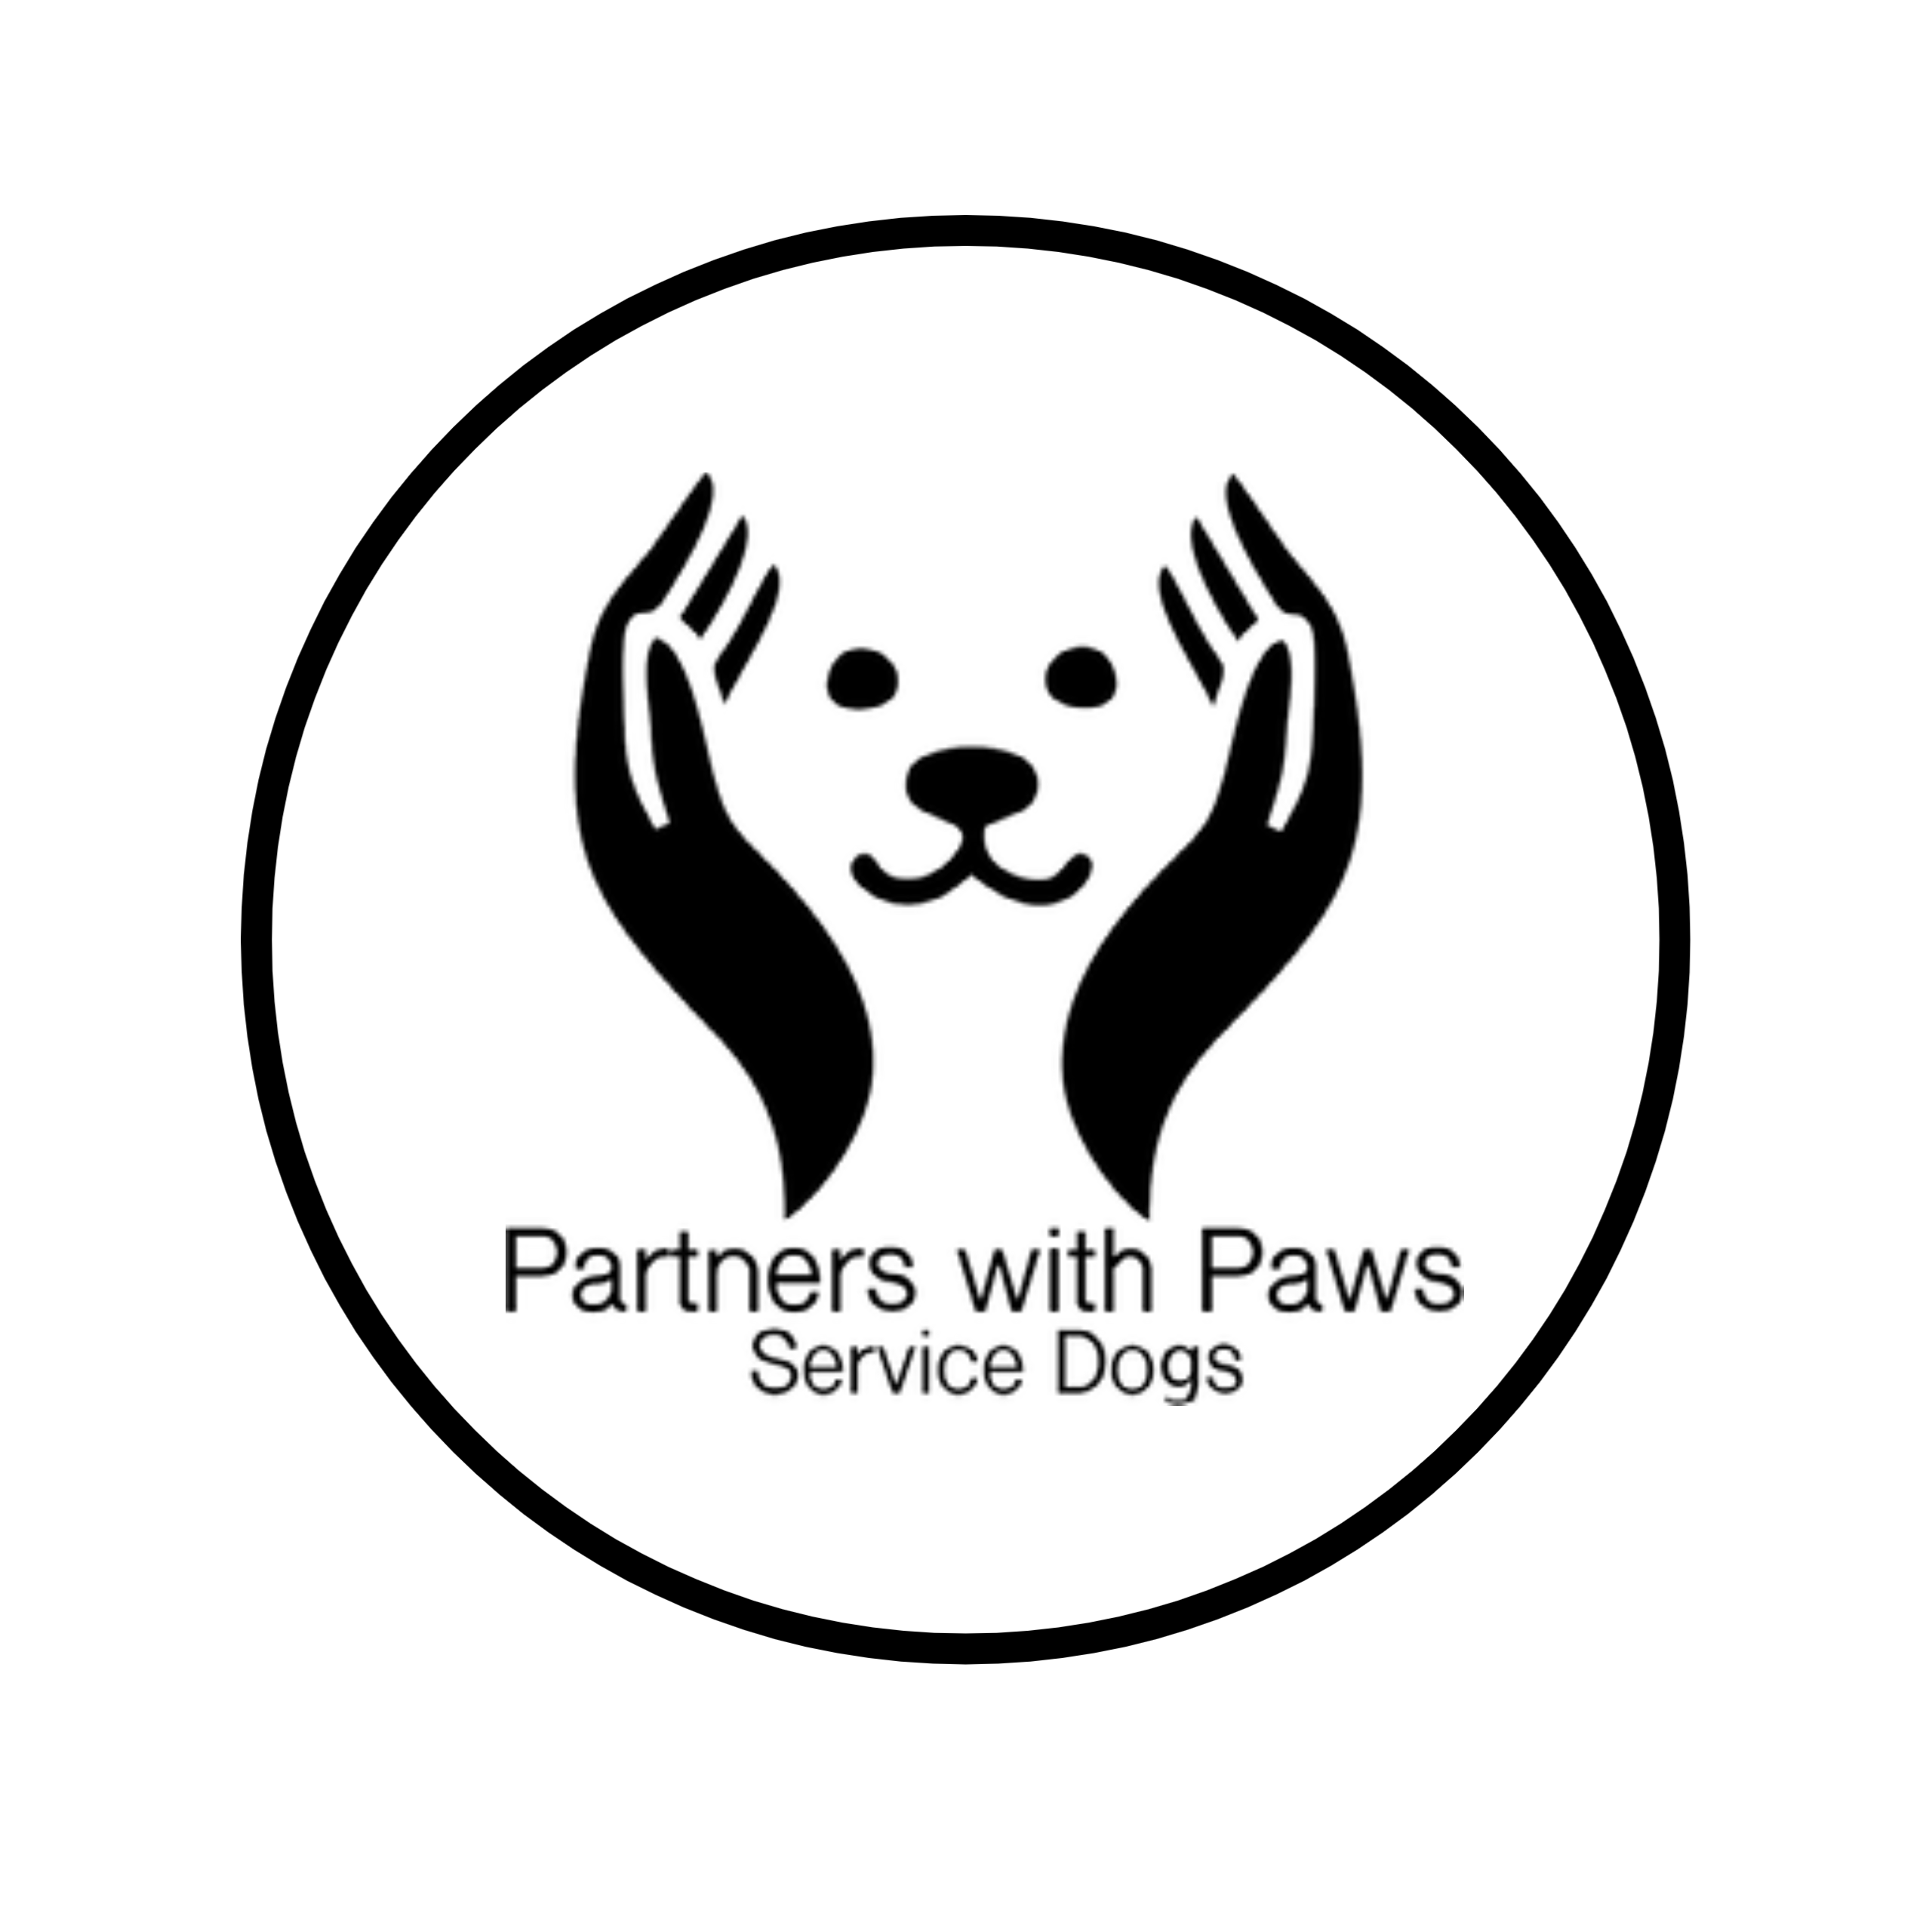 Partners with Paws Service Dogs logo